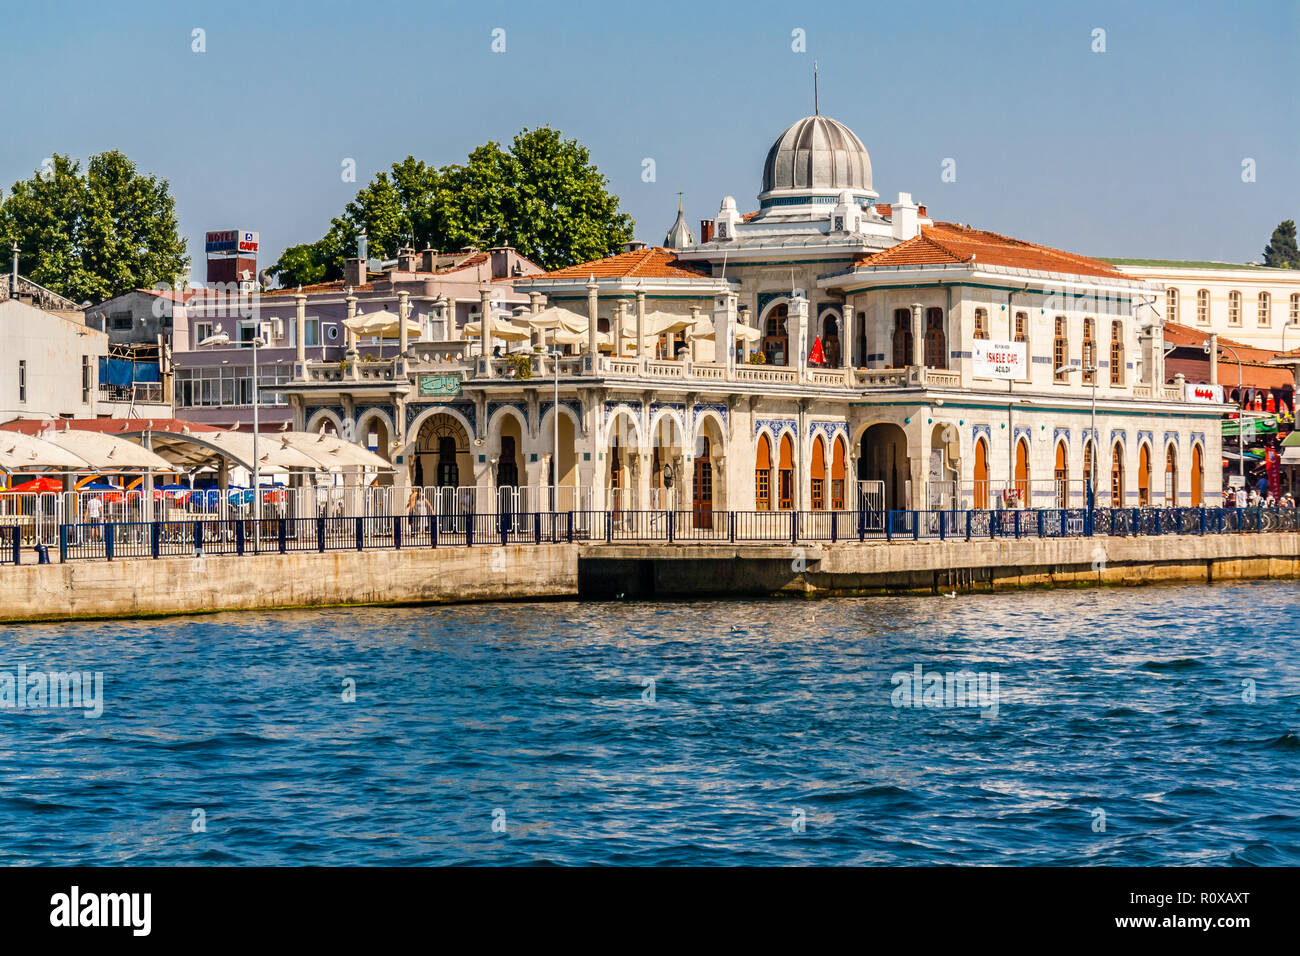 Ferry port on Buyukada, one of the Princes Islands, decorated with typical Ottoman tiles. Stock Photo